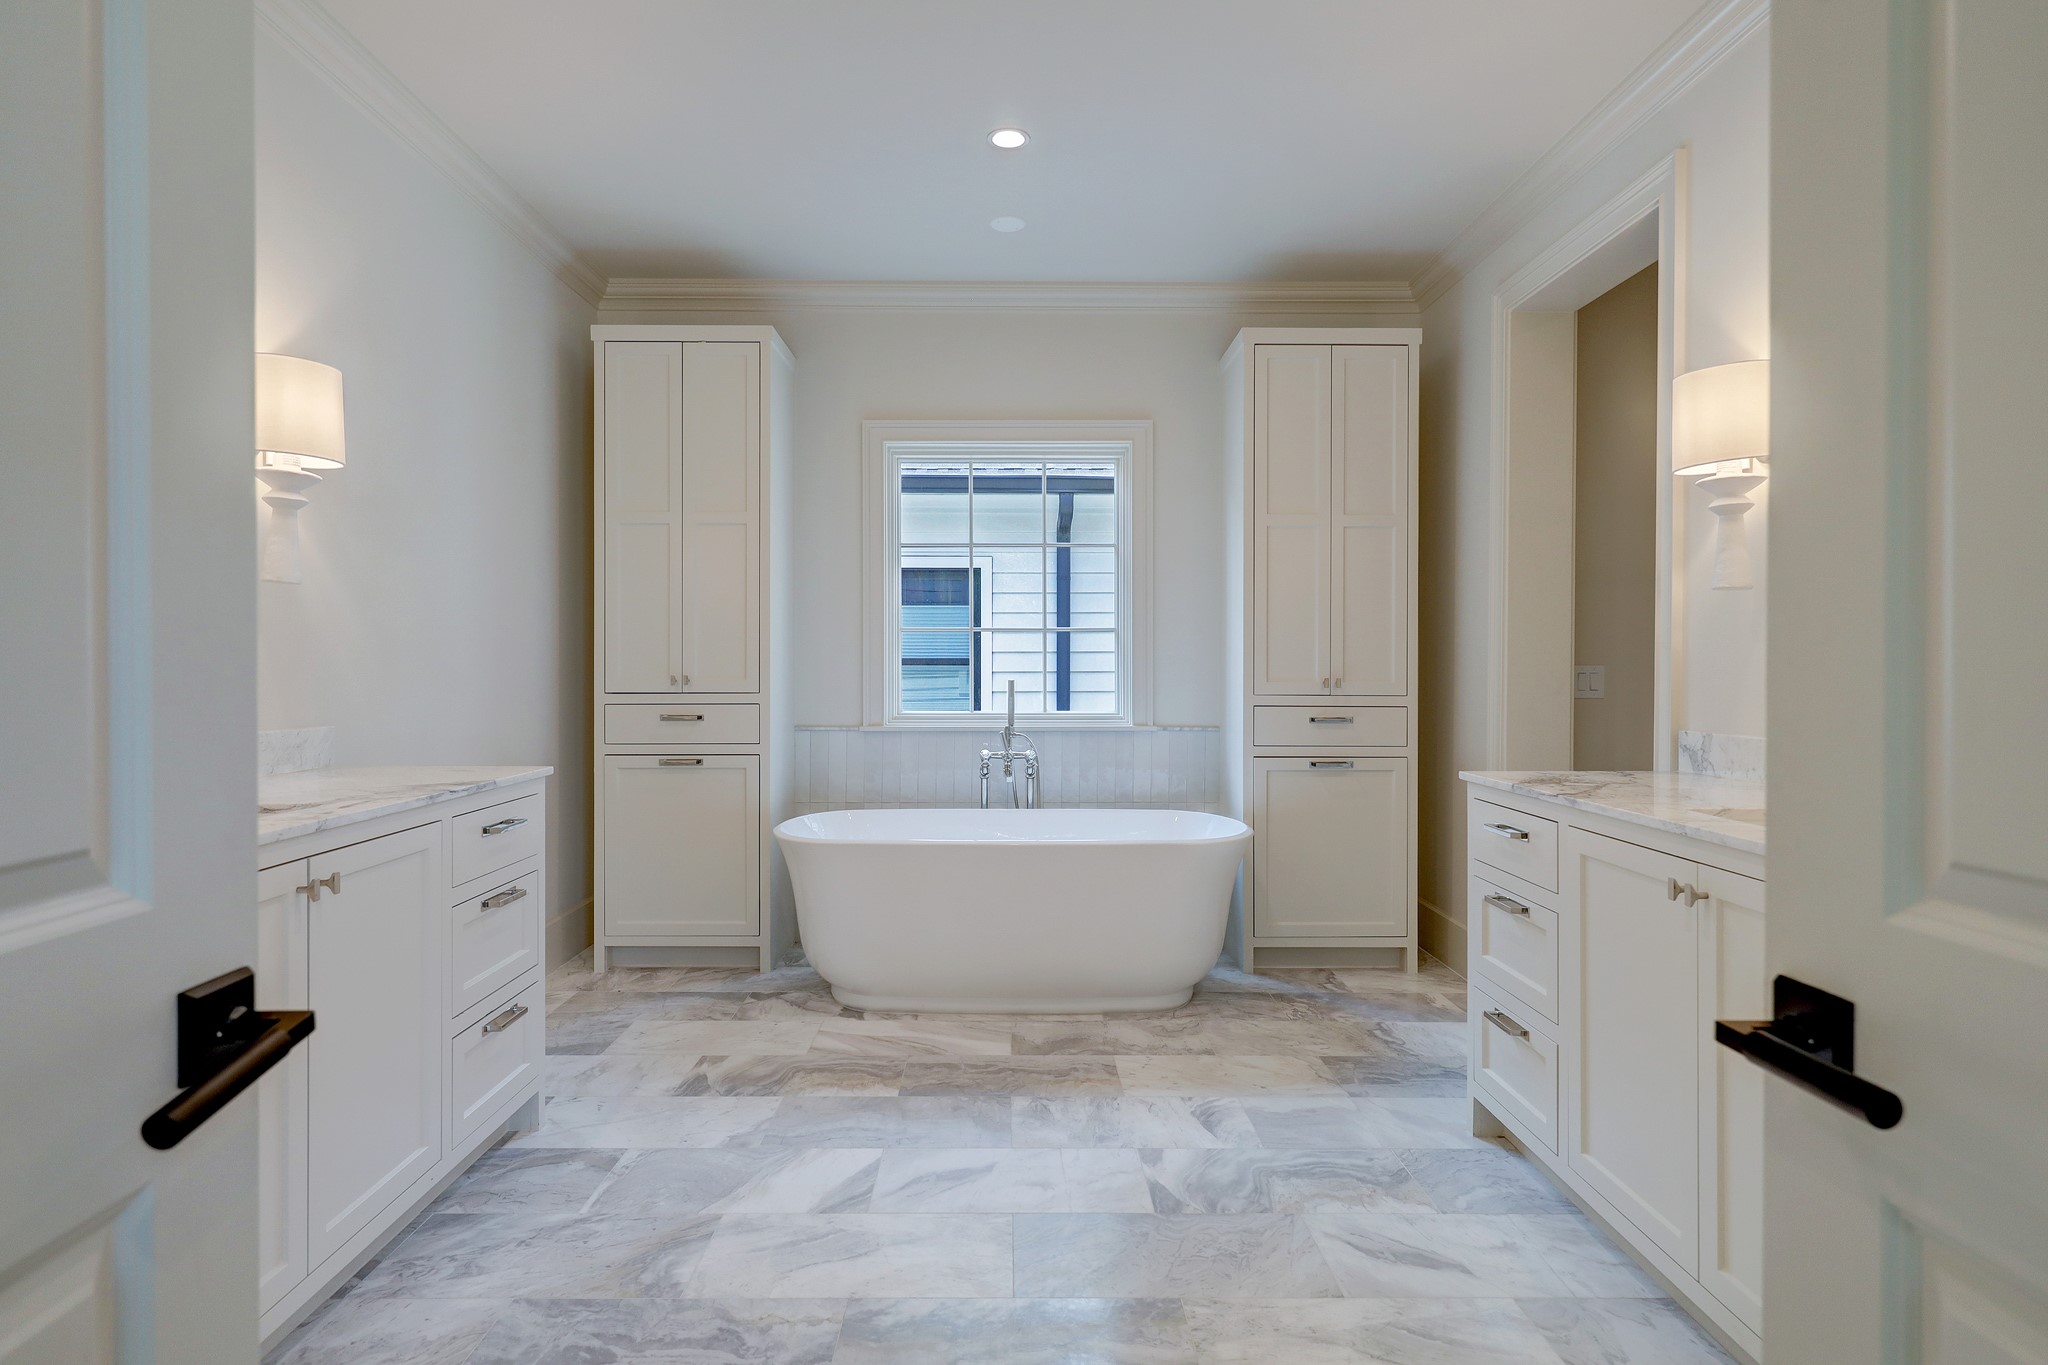 Unwind in the owner's spa-like bathroom offering two vanity areas with designer lighting, soaking tub, Sienna Sunset marble 12” x 24” on floor, Michelangelo Arabescato countertops & separate walk-in shower and walk-in closet.